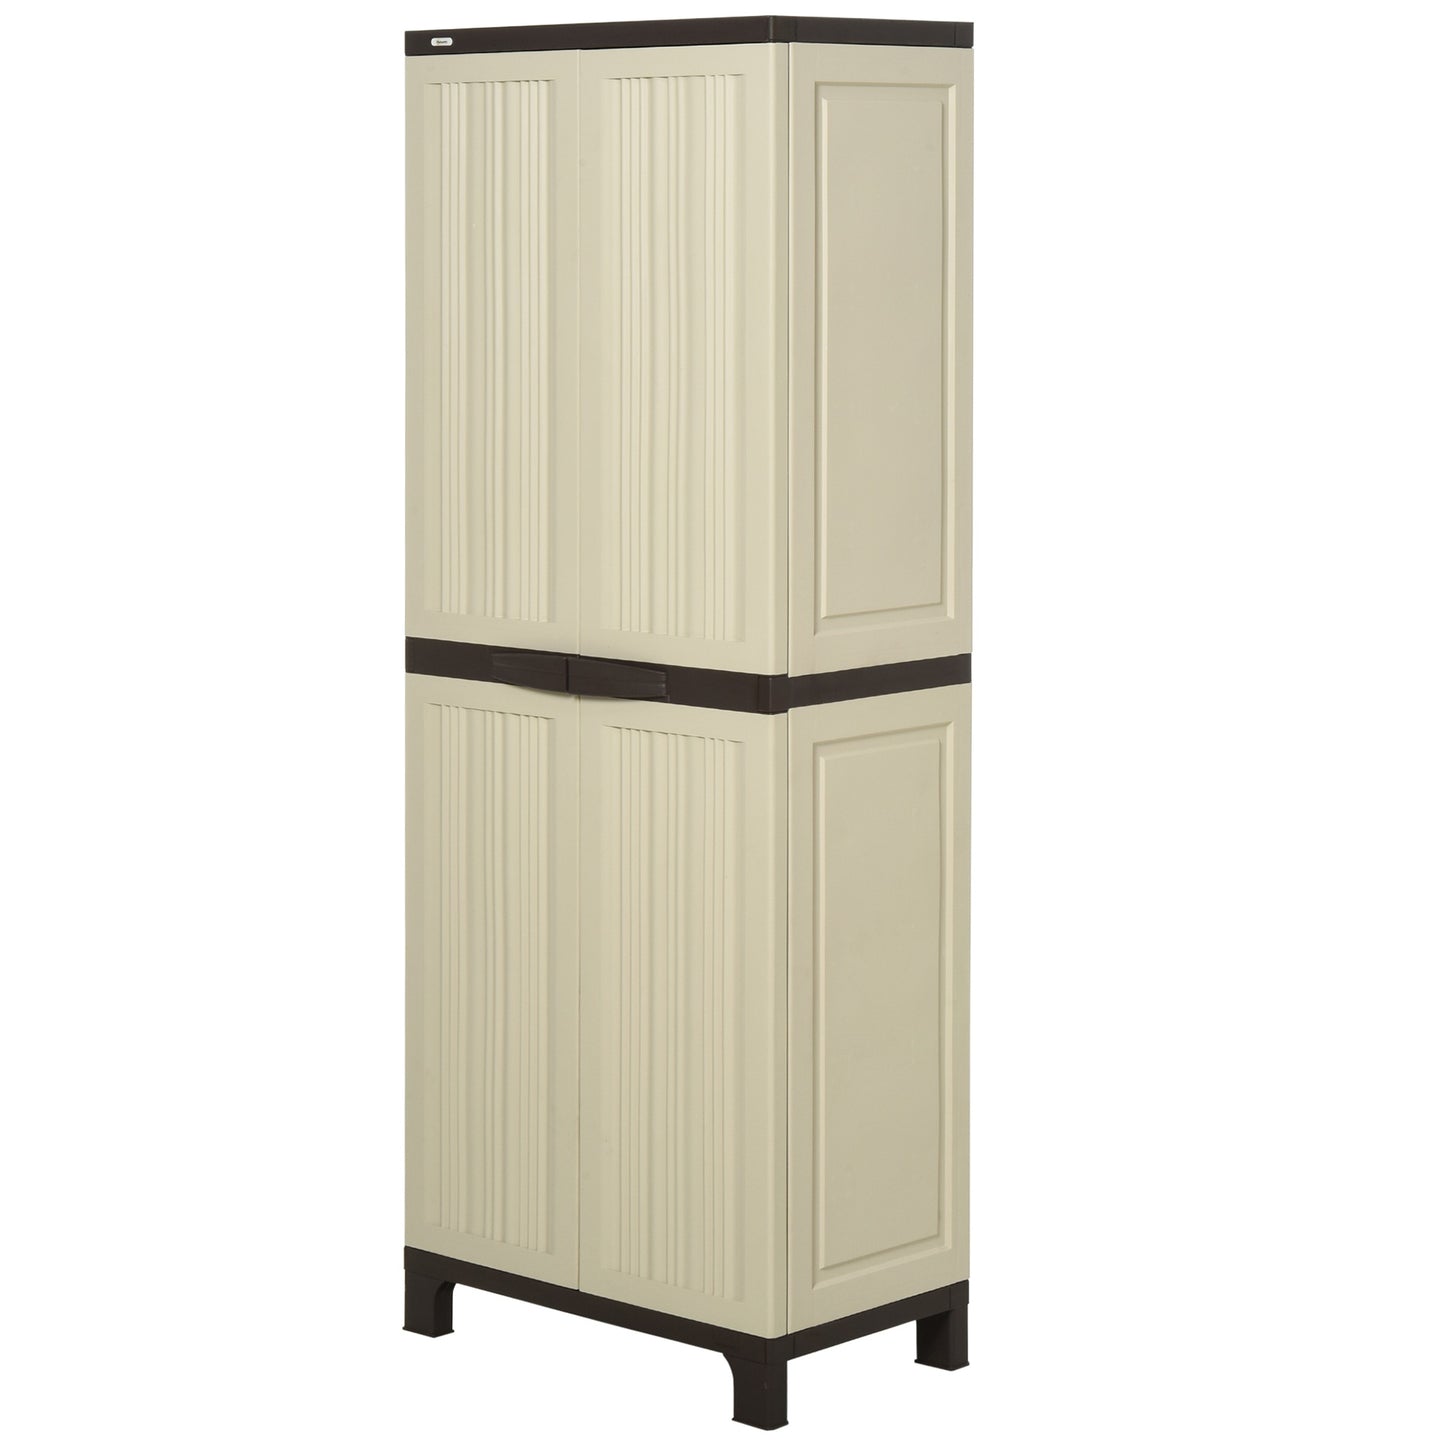 Outsunny Garden Cabinet Shed, Double-Door, 65Lx37Wx172H cm-Beige